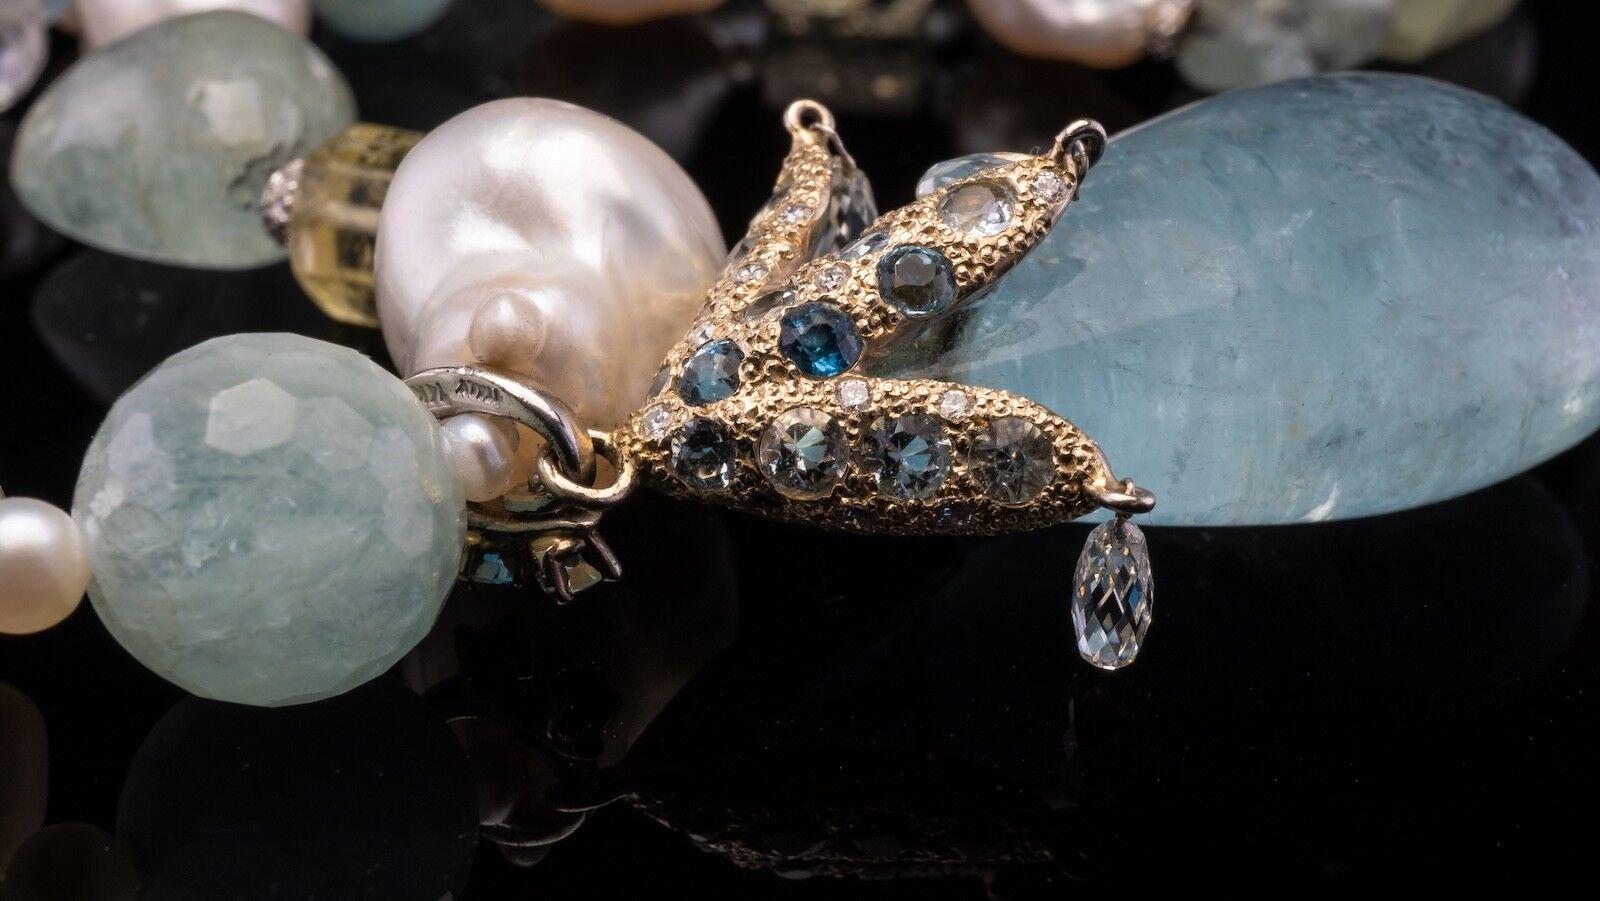 freshwater baroque pearls with mirror cut aquamarine and gold rondelles